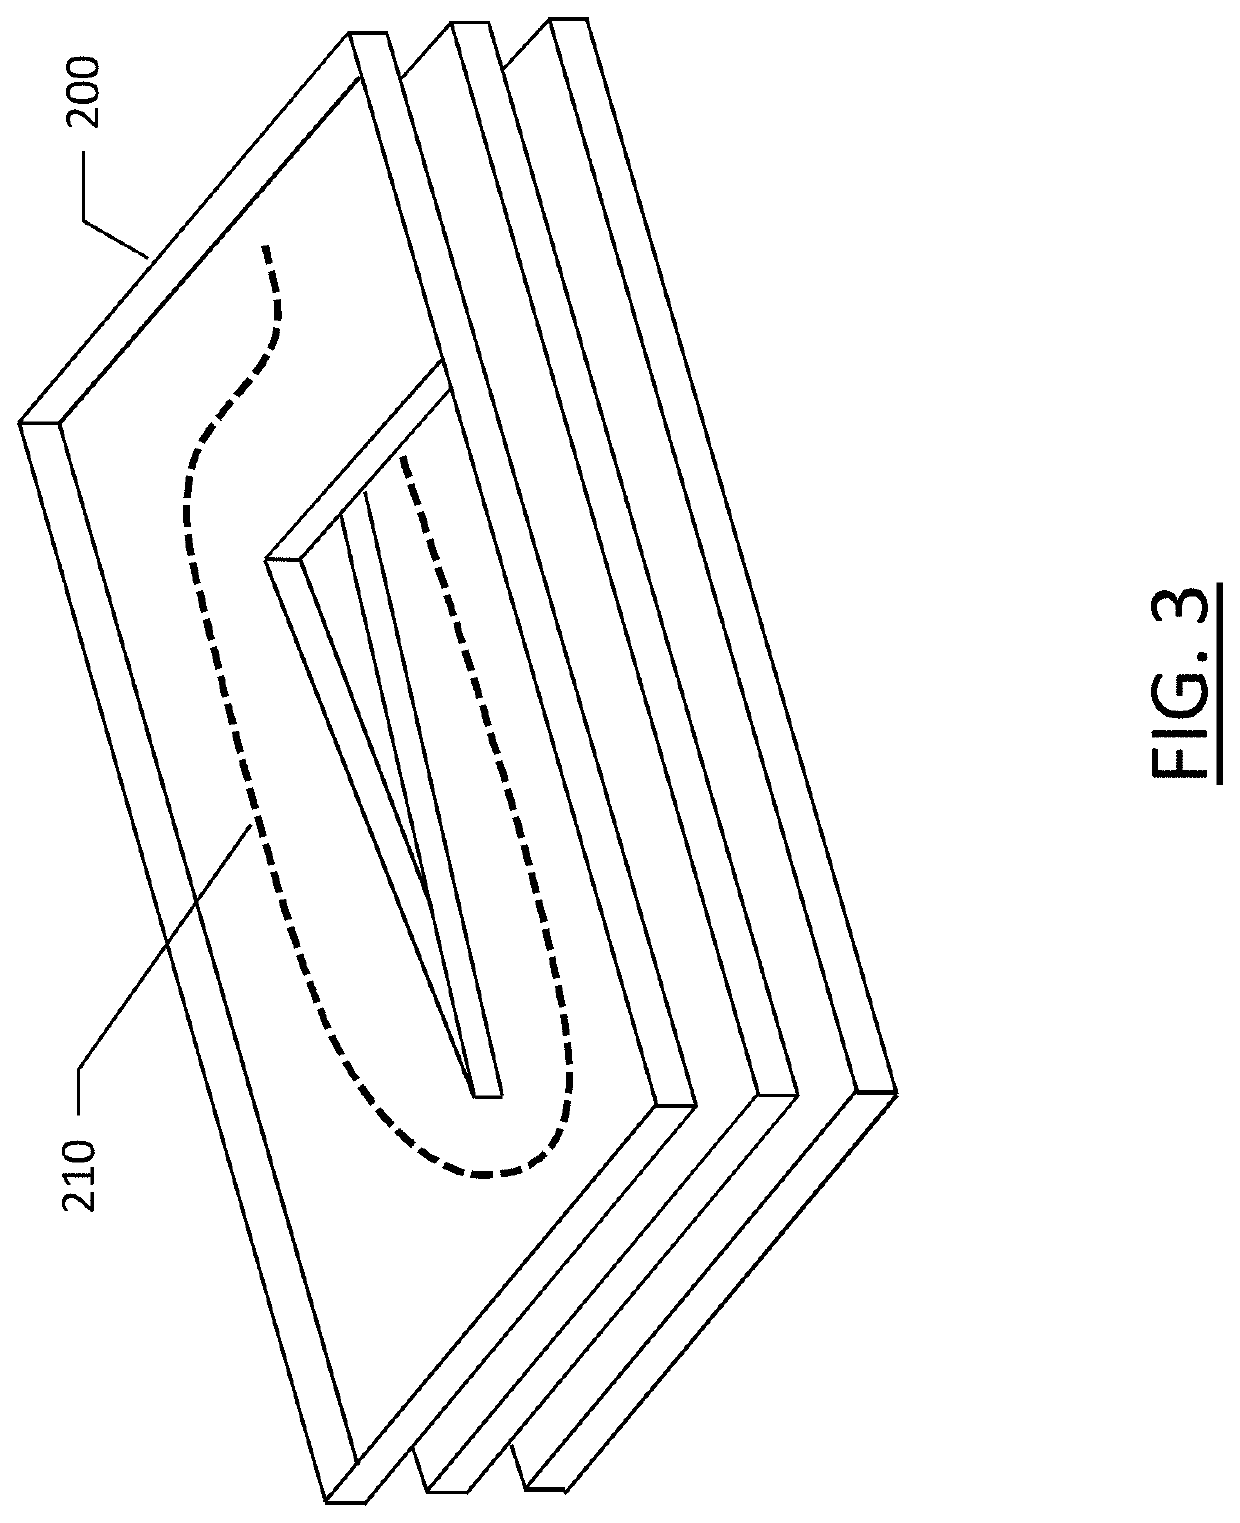 Method, apparatus and computer program product for mapping and modeling a three dimensional structure